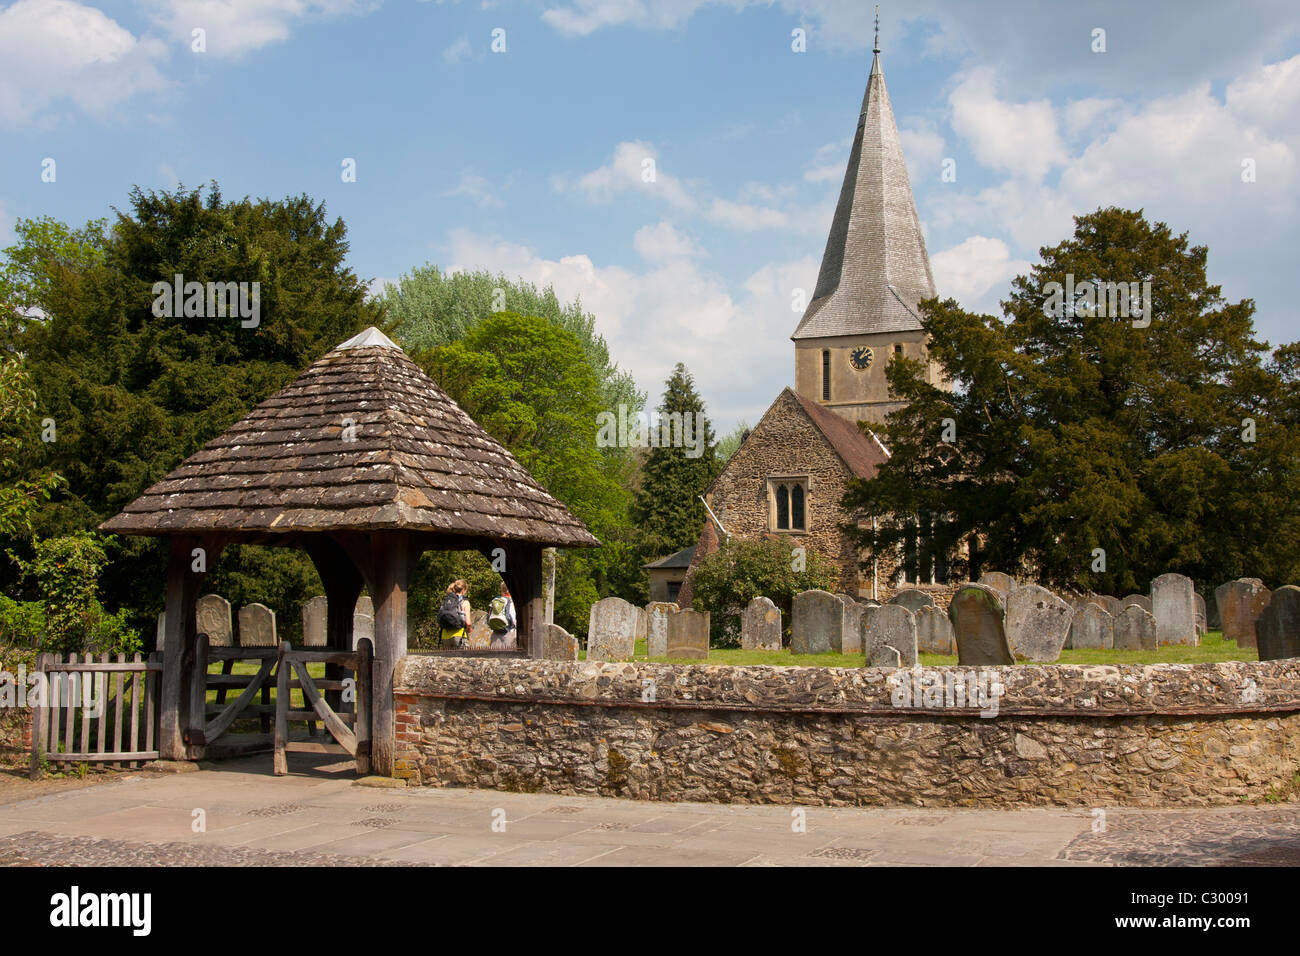 St. James Church, Shere, Guildford, Surrey, England Stock Photo